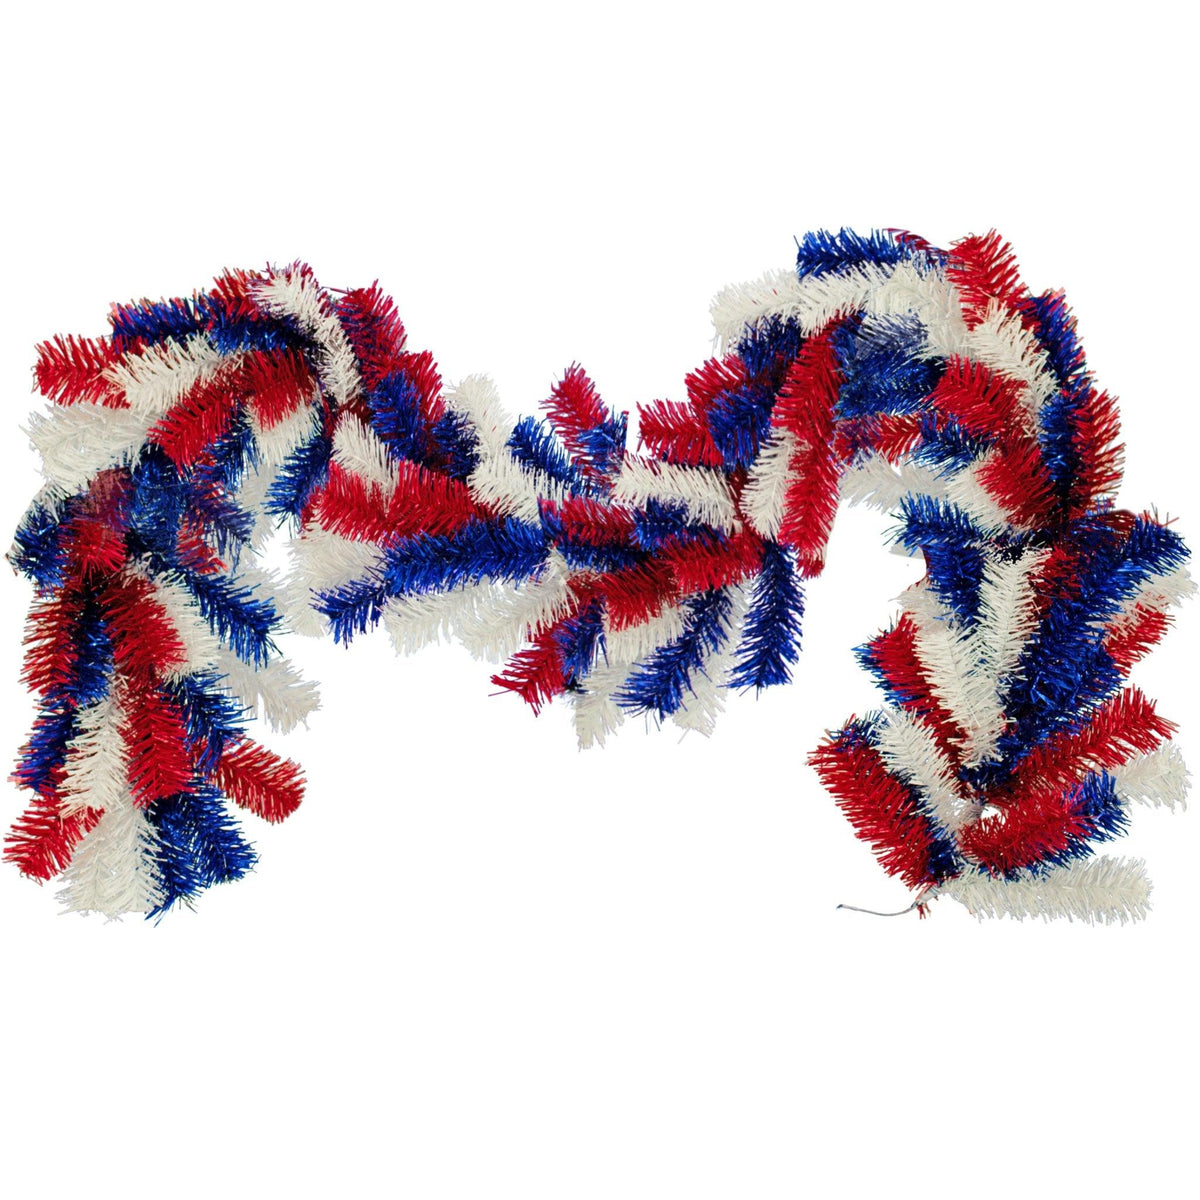 Shop for Lee Display's brand new 6FT Shiny Red, White, and Blue 4th of July Mixed Tinsel Brush Garlands on sale now at leedisplay.com.  